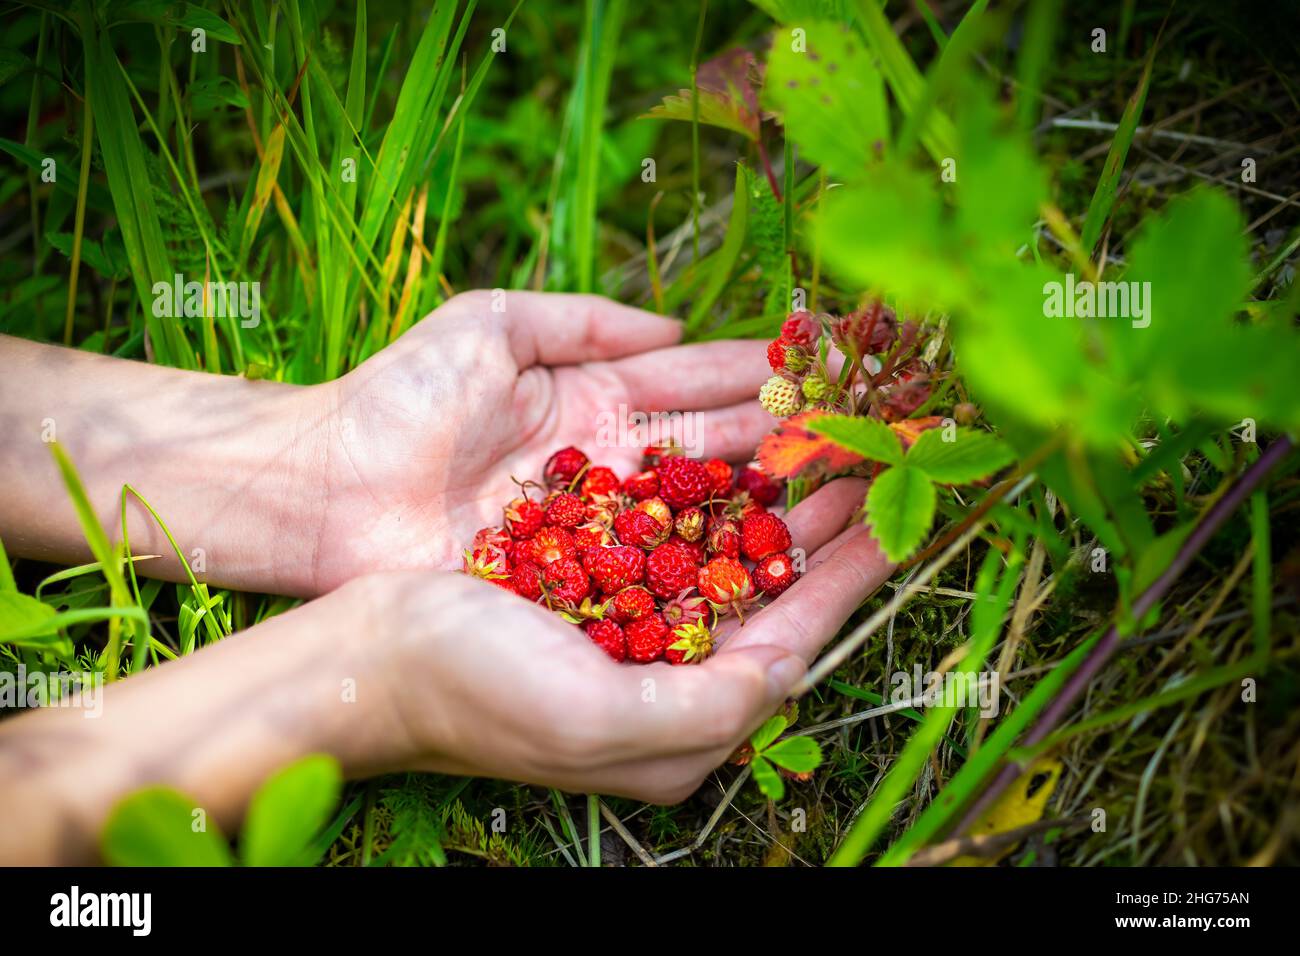 Hands closeup picking foraging many red wild alpine strawberries berries in North Carolina blue ridge mountains growing as wild edible on ground Stock Photo